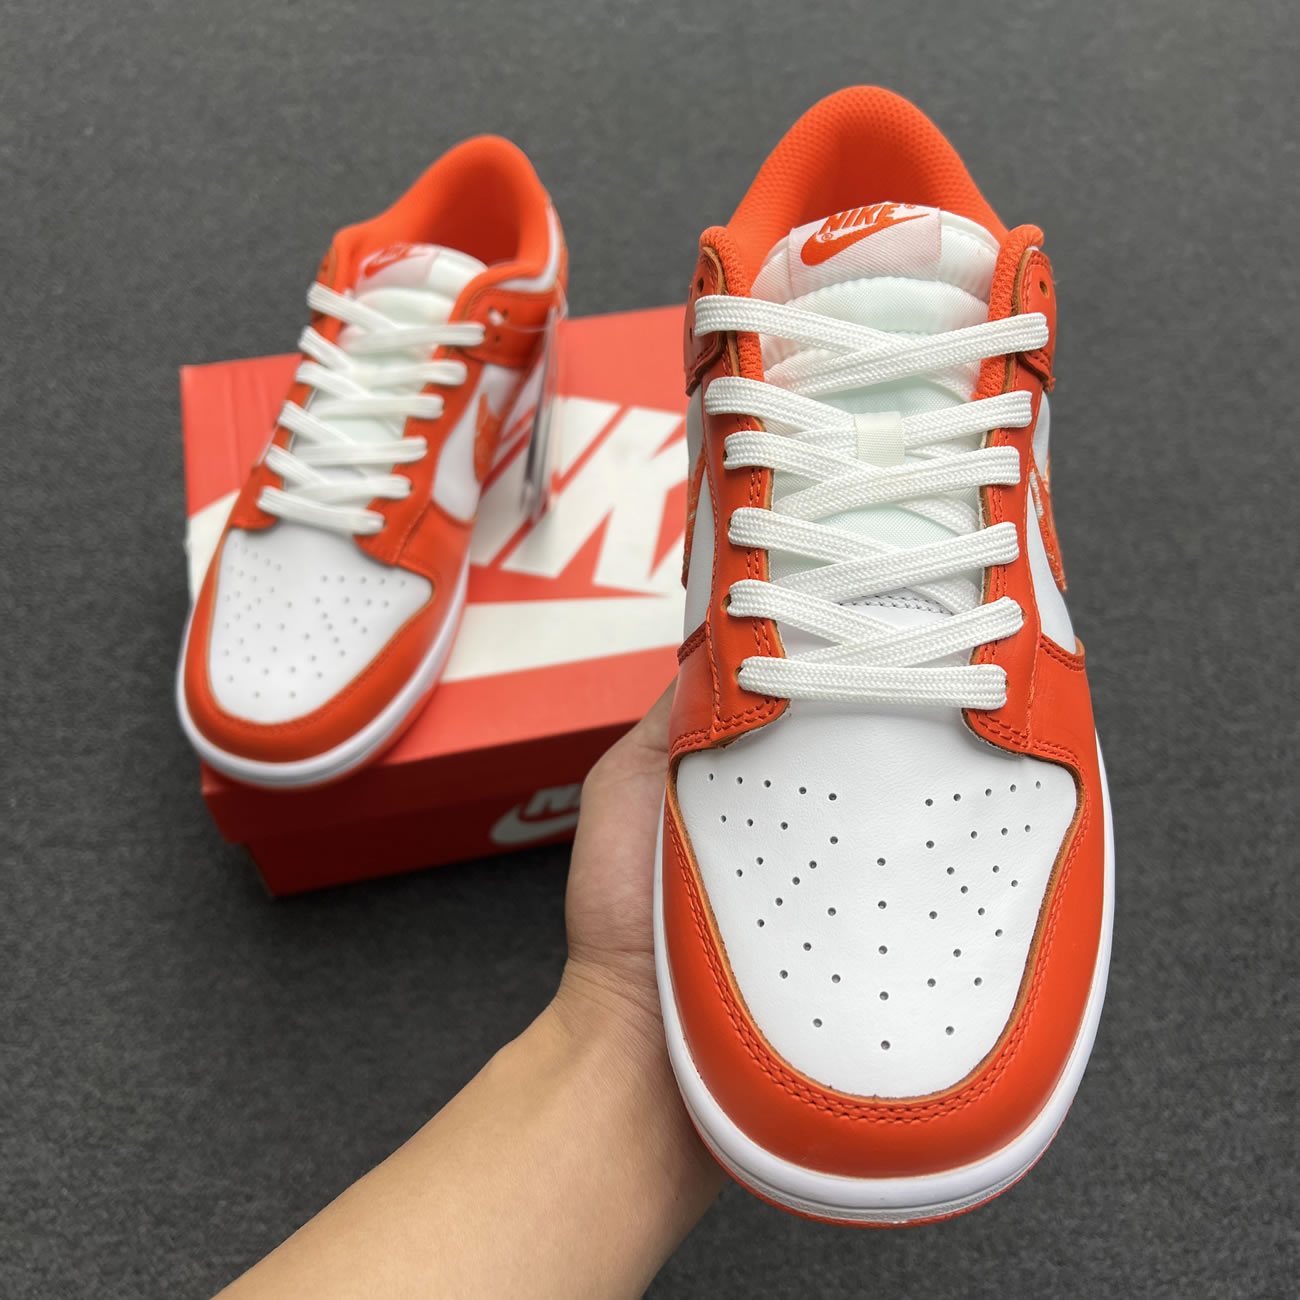 Nike Dunk Low Essential Paisley Pack Orange W Dh4401 103 (3) - newkick.org